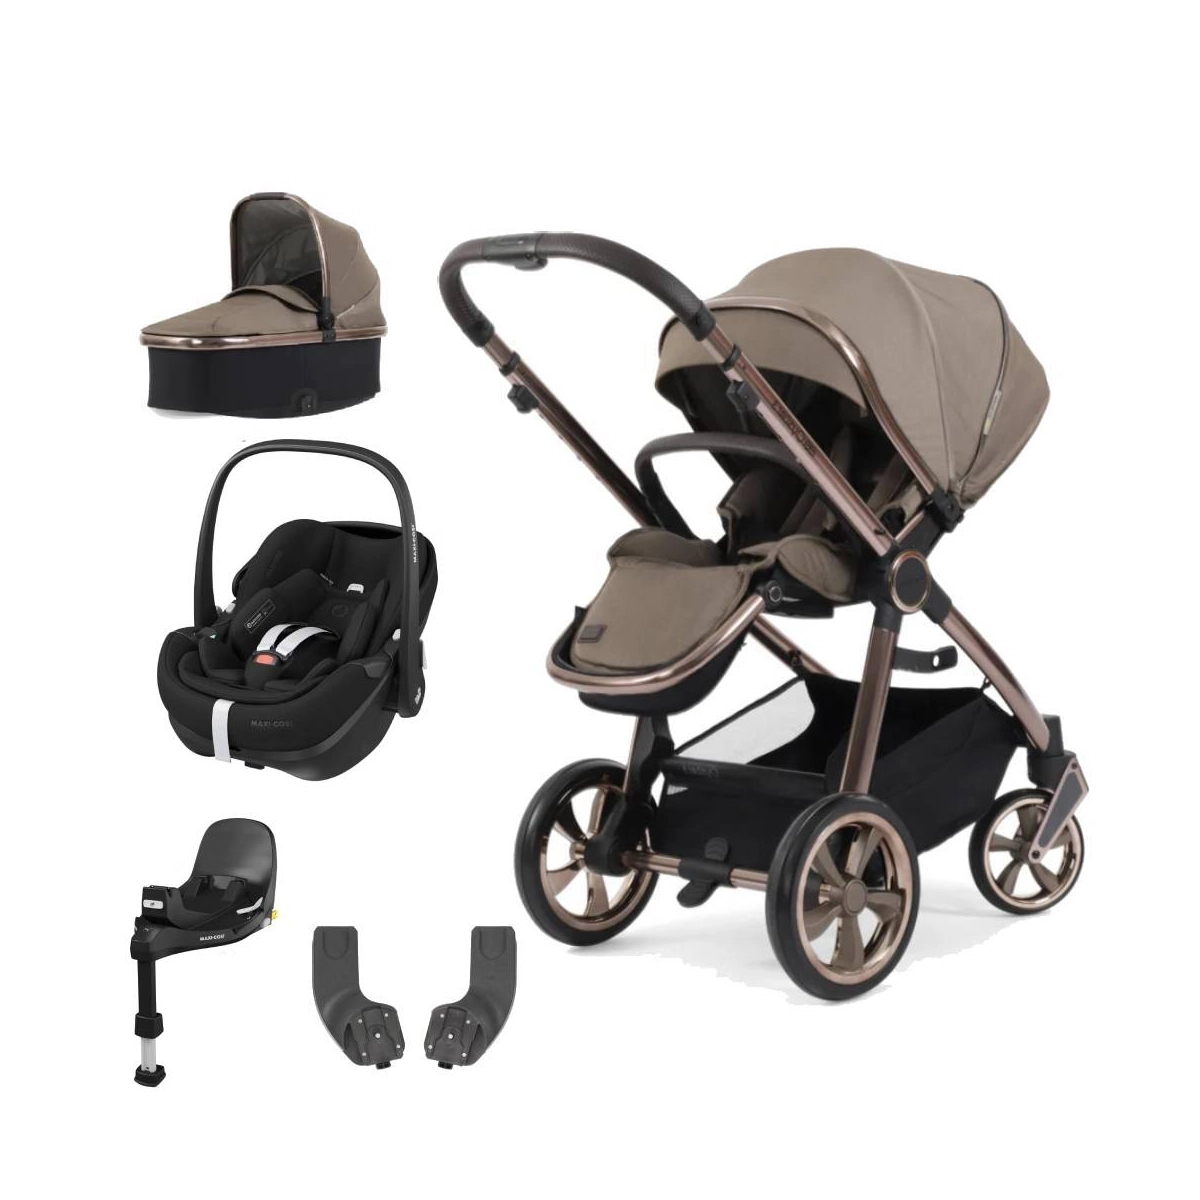 BabyStyle Oyster 3 Bronze Chassis Essential 5 Piece Bundle with Maxi Cosi Pebble 360 Pro Car Seat & Base